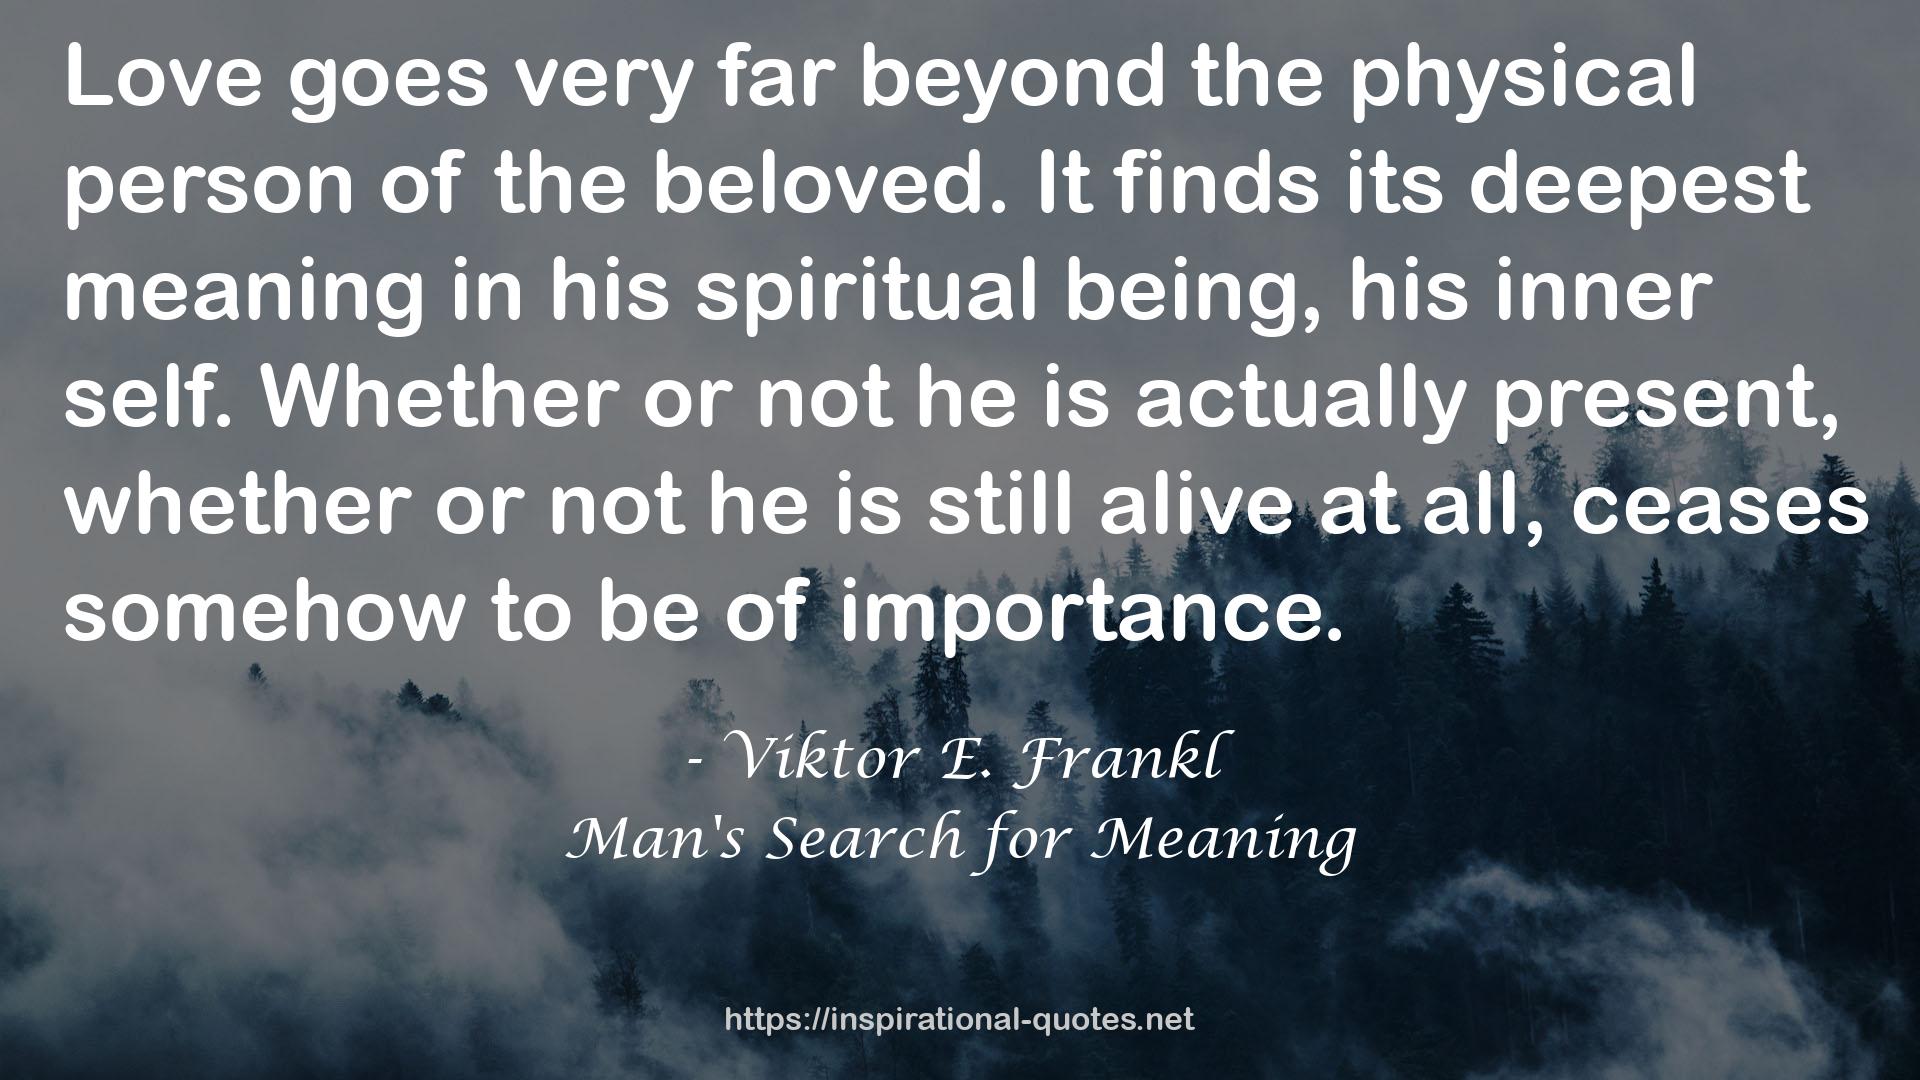 Man's Search for Meaning QUOTES